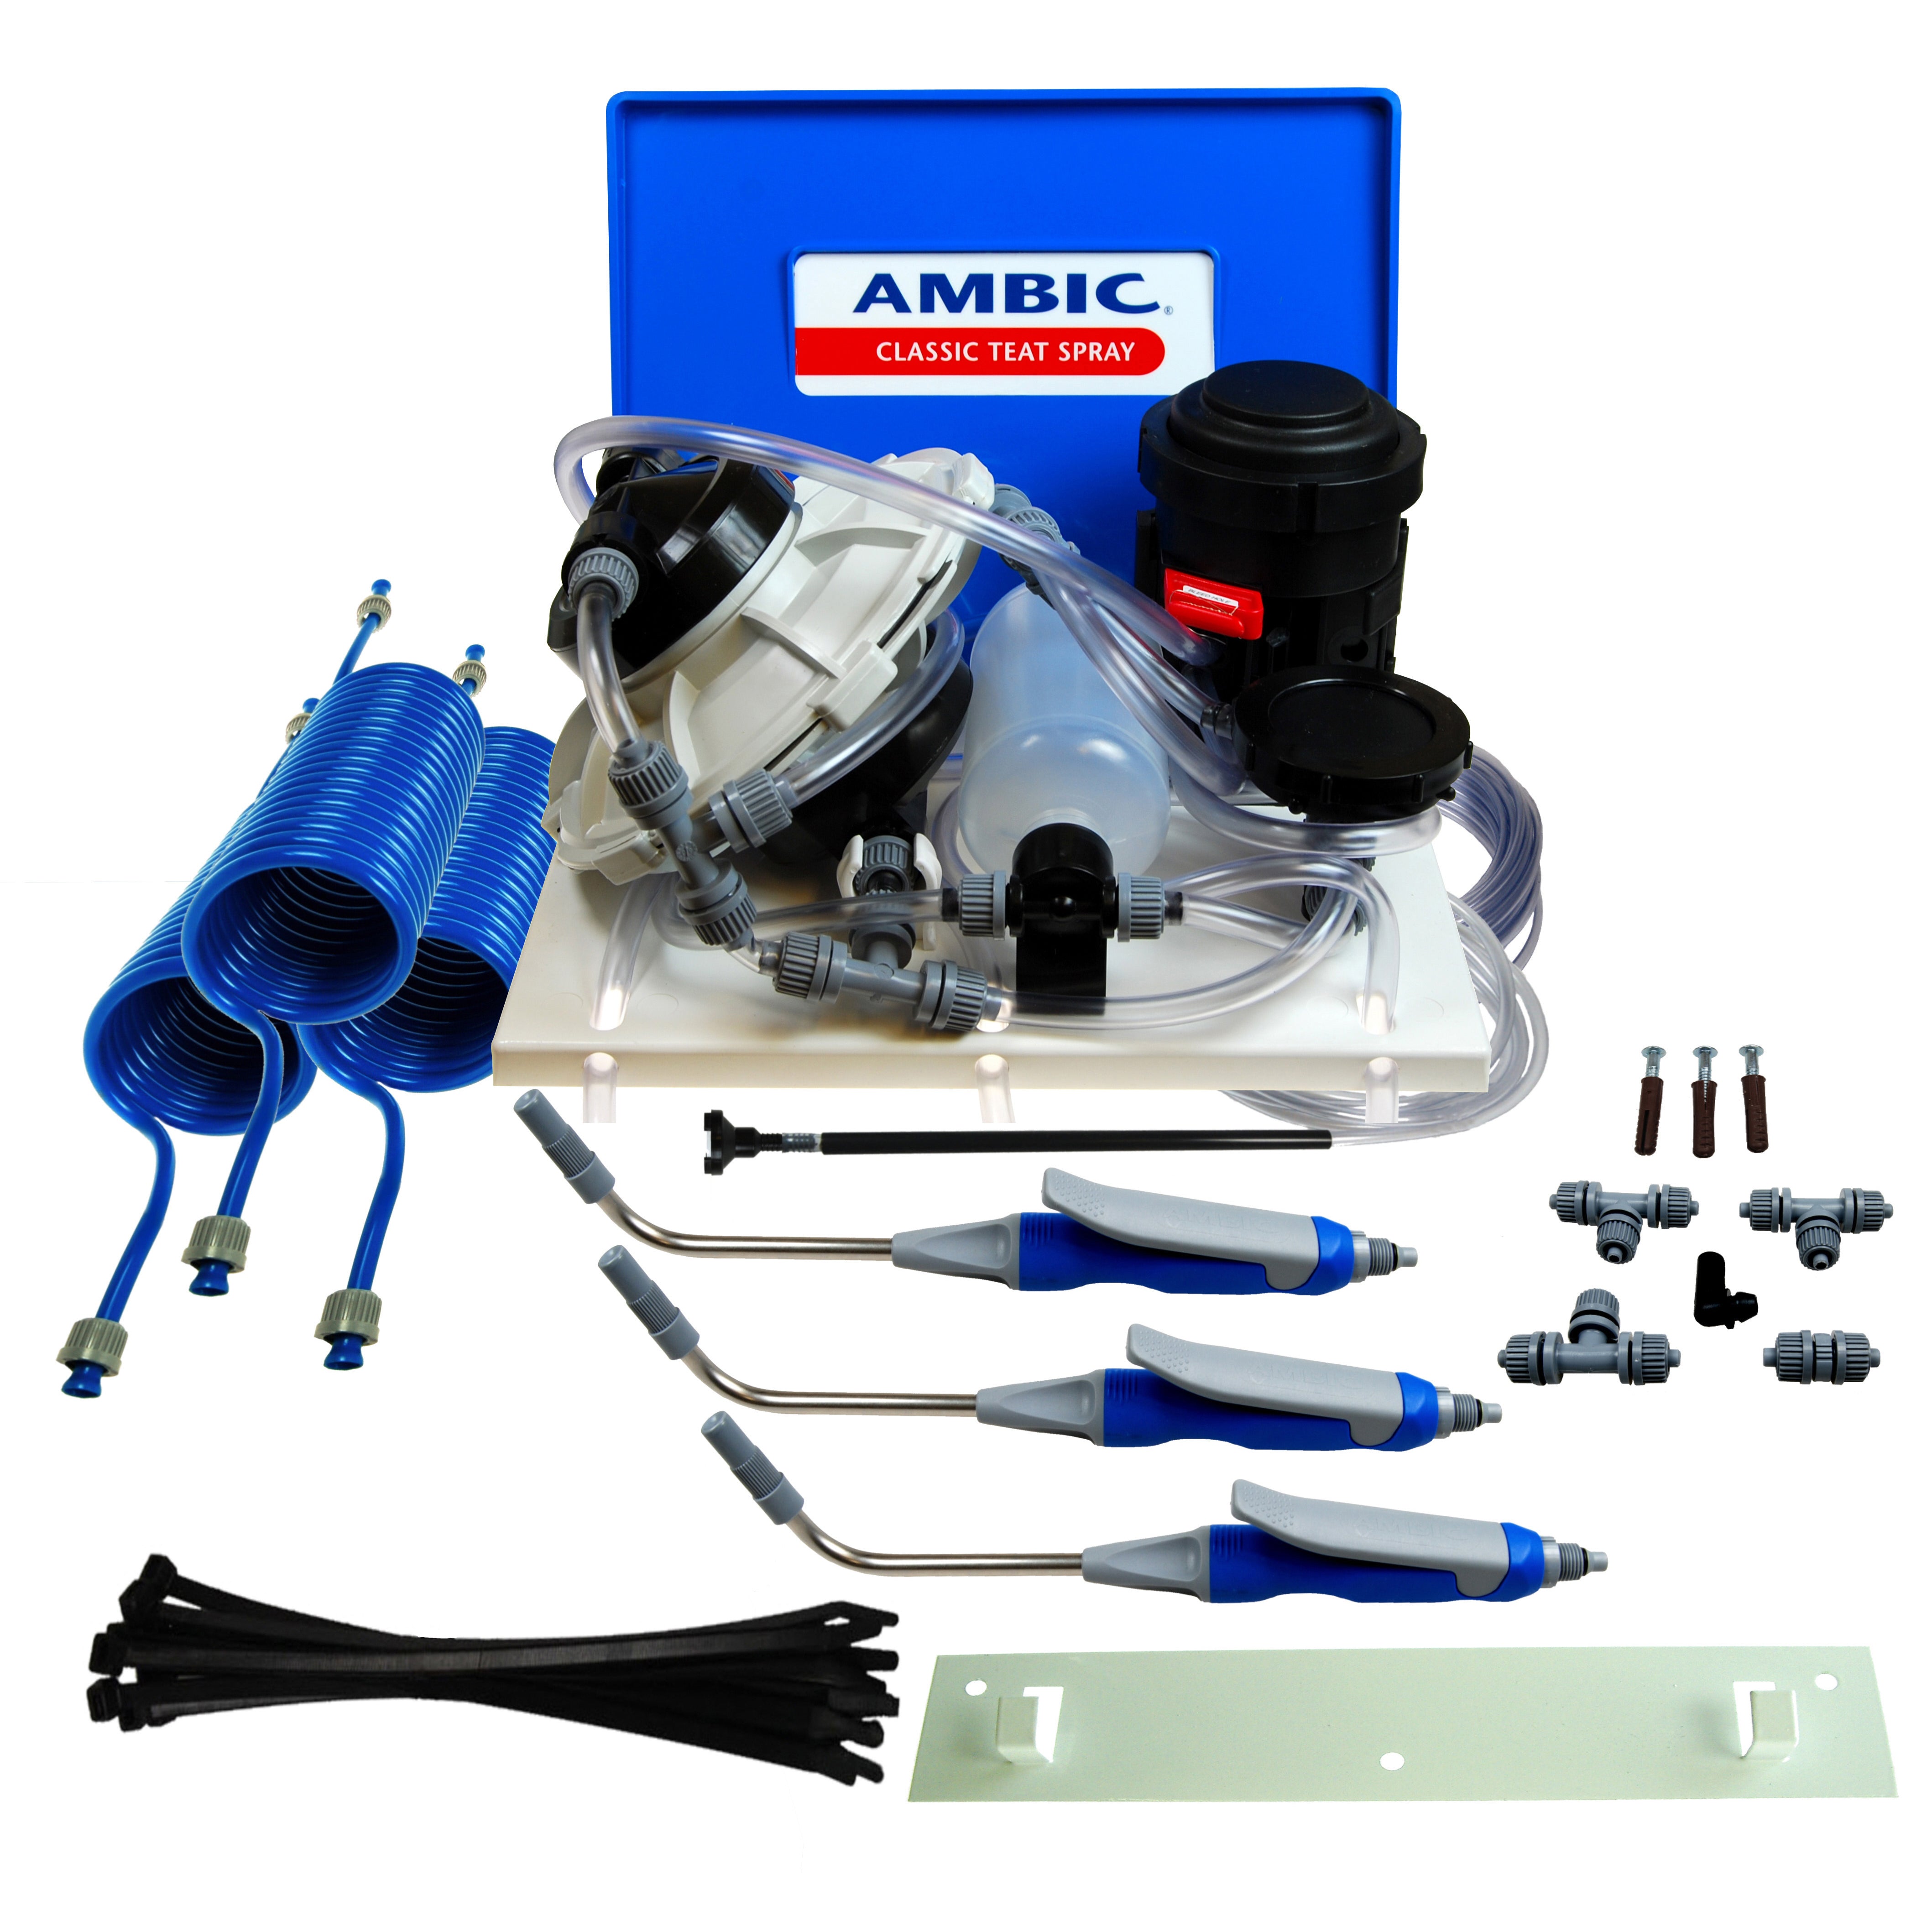 Ambic Classic Teat Spray System Complete - Classic Guns